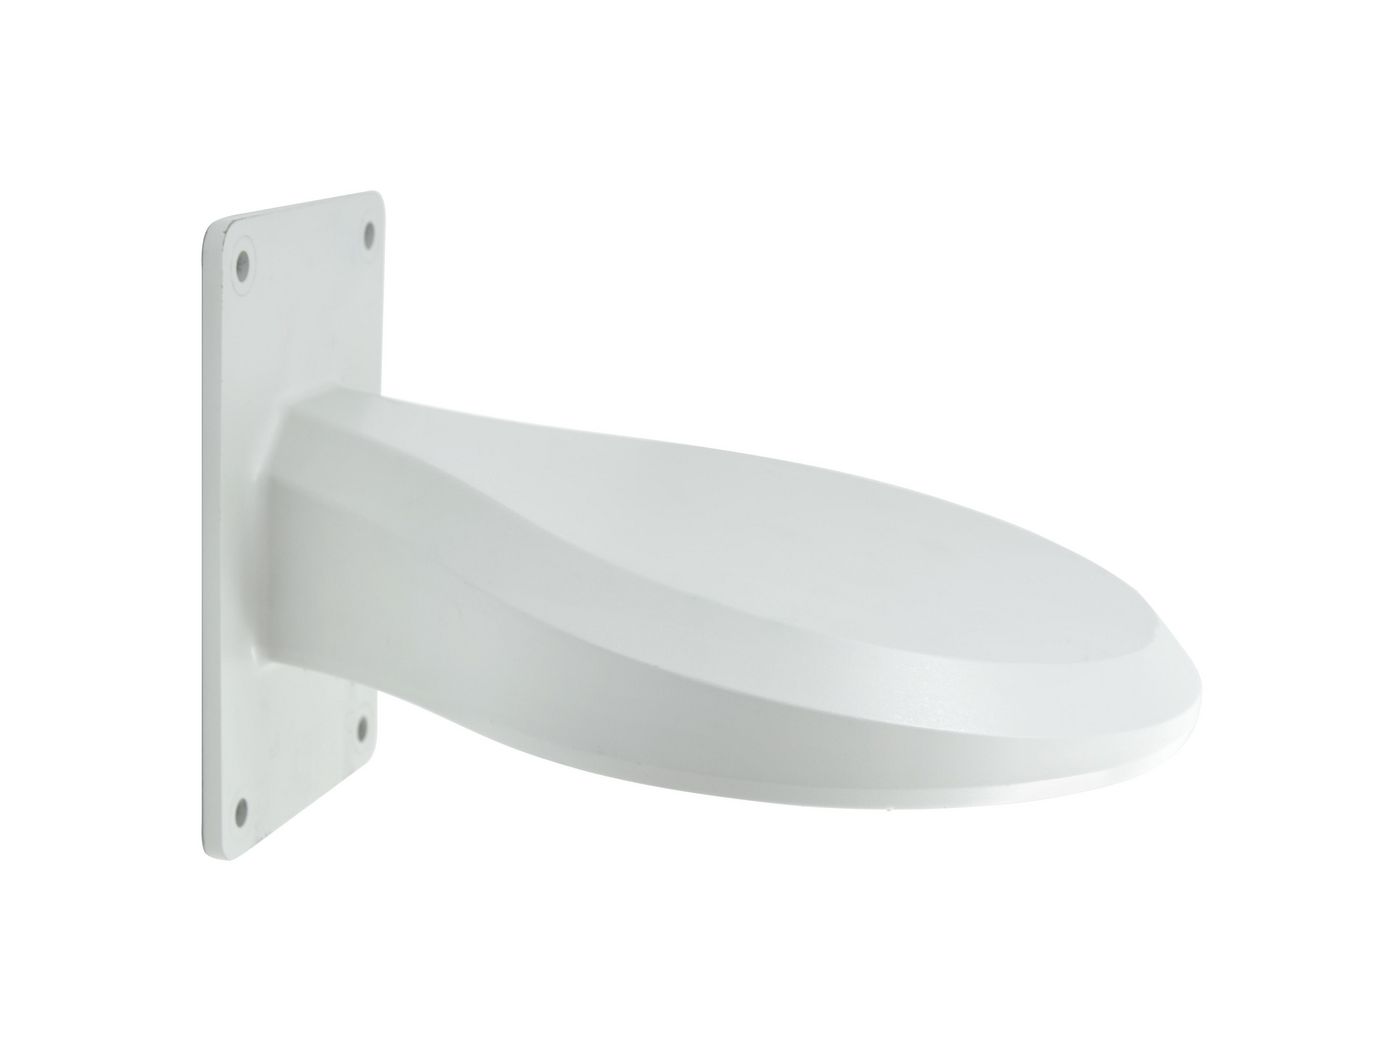 LevelOne CAS-2314 WALL MOUNT 